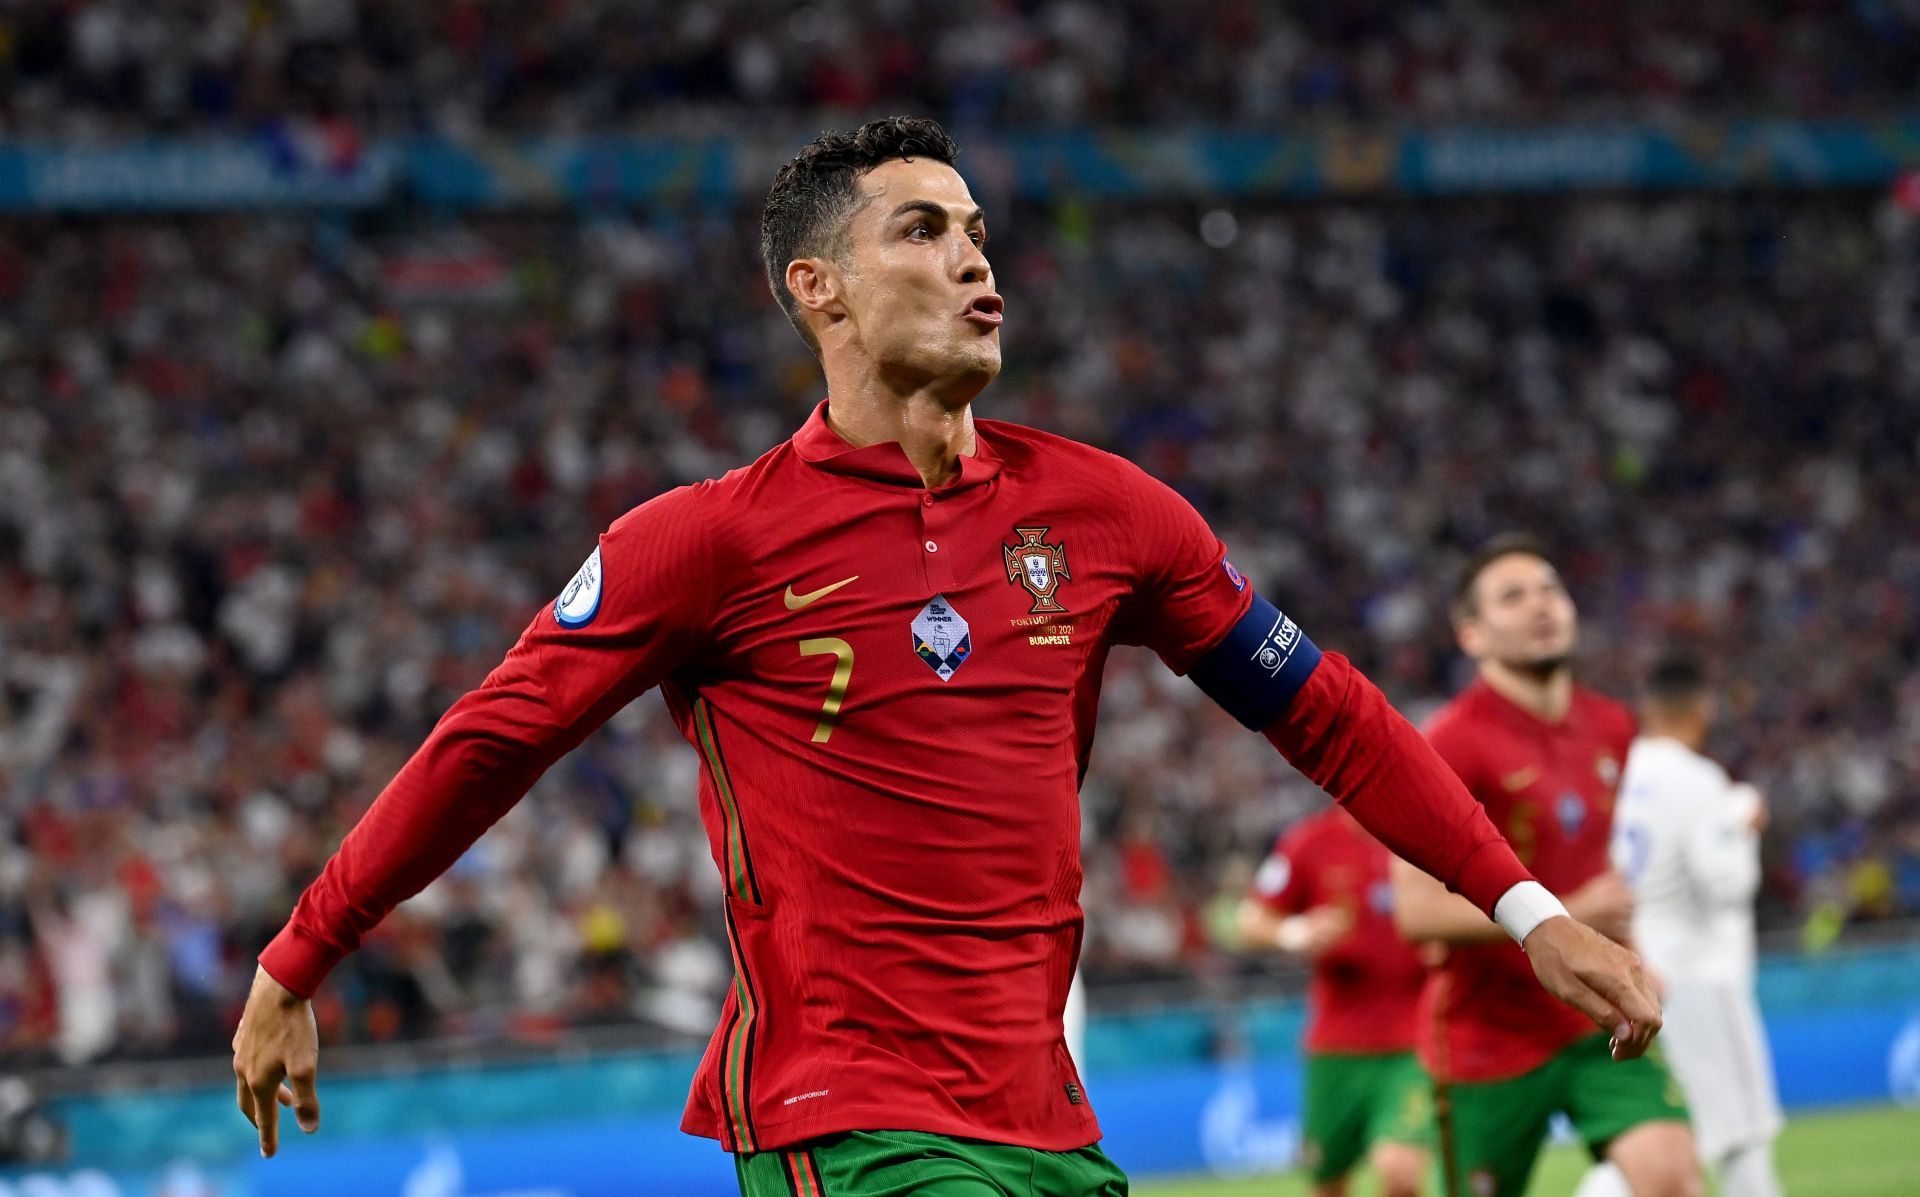 Cristiano Ronaldo will once again be an important player for Portugal